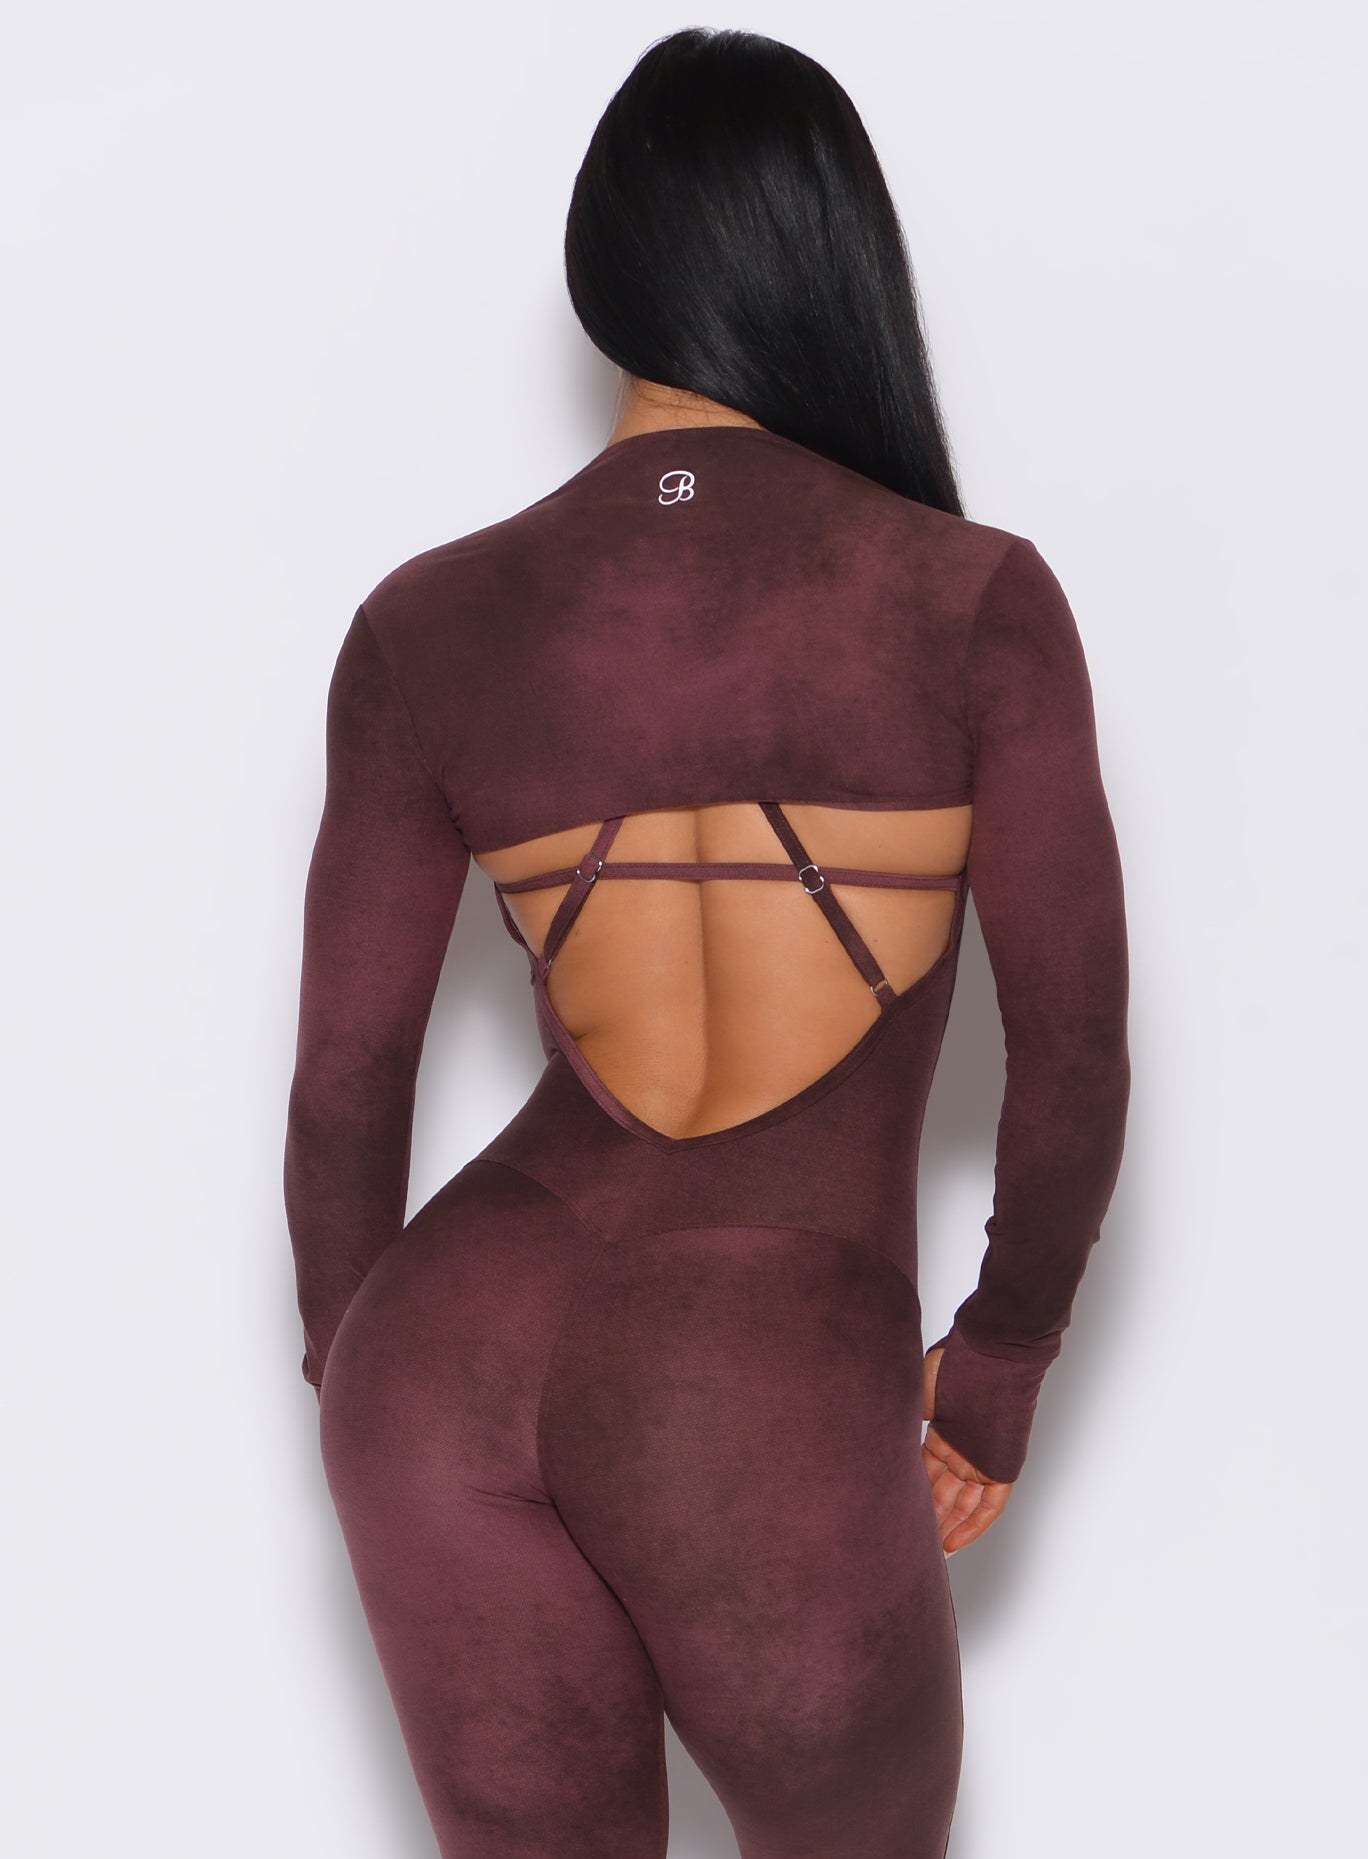 Back profile view of a model wearing our shape shrug along with a bodysuit in vintage port color